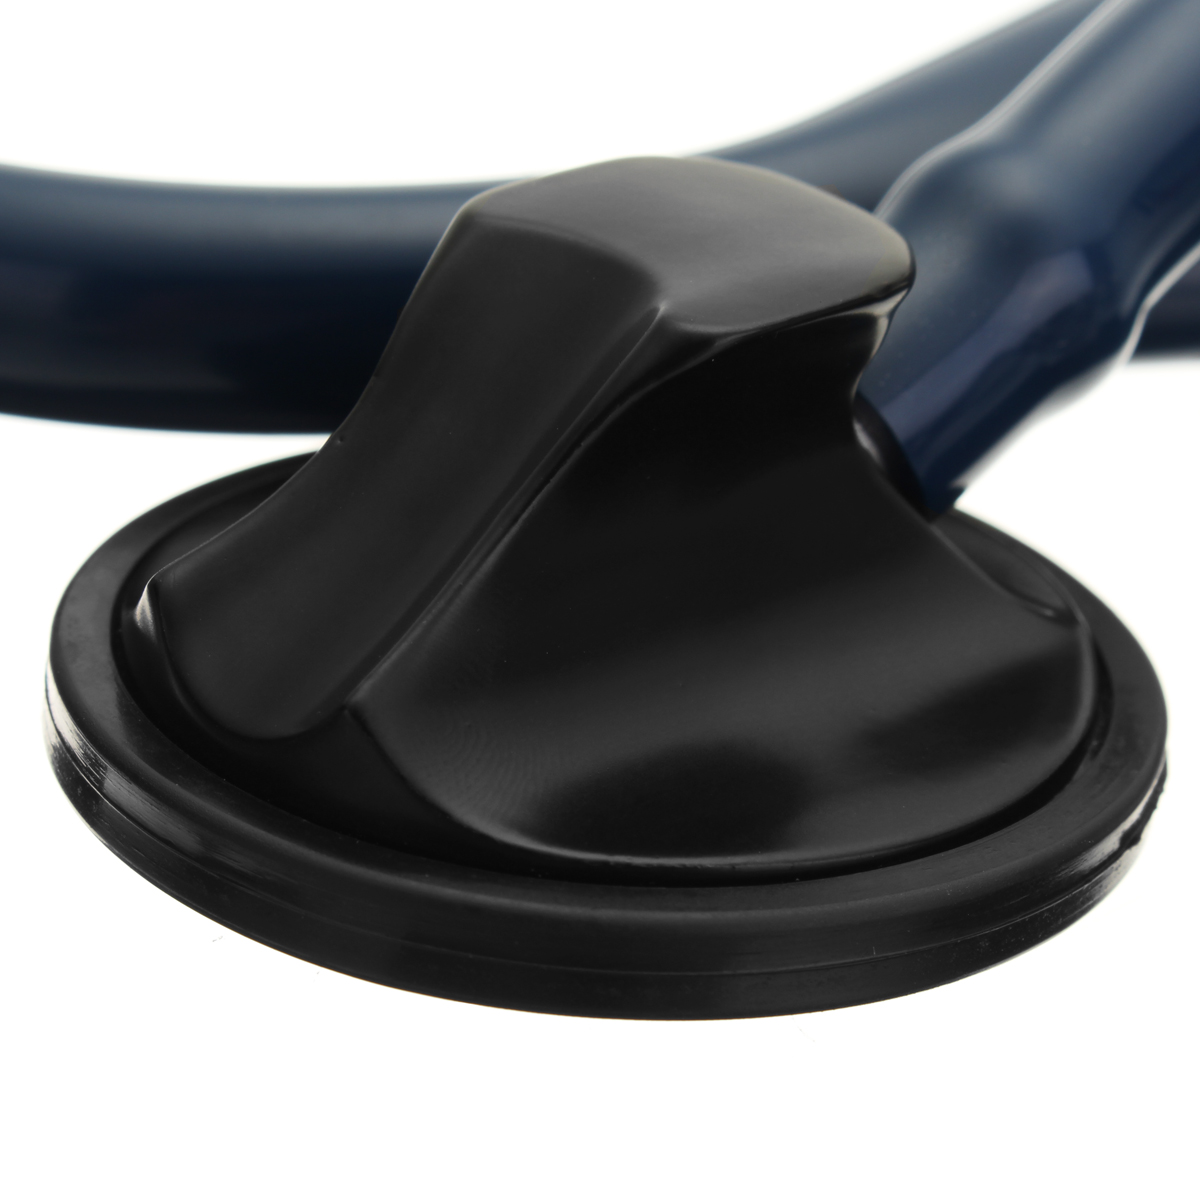 Professional-Edition-27-Inch-Cardiology-Stethoscope-Tunable-Diaphragm-Doctor-1425487-9